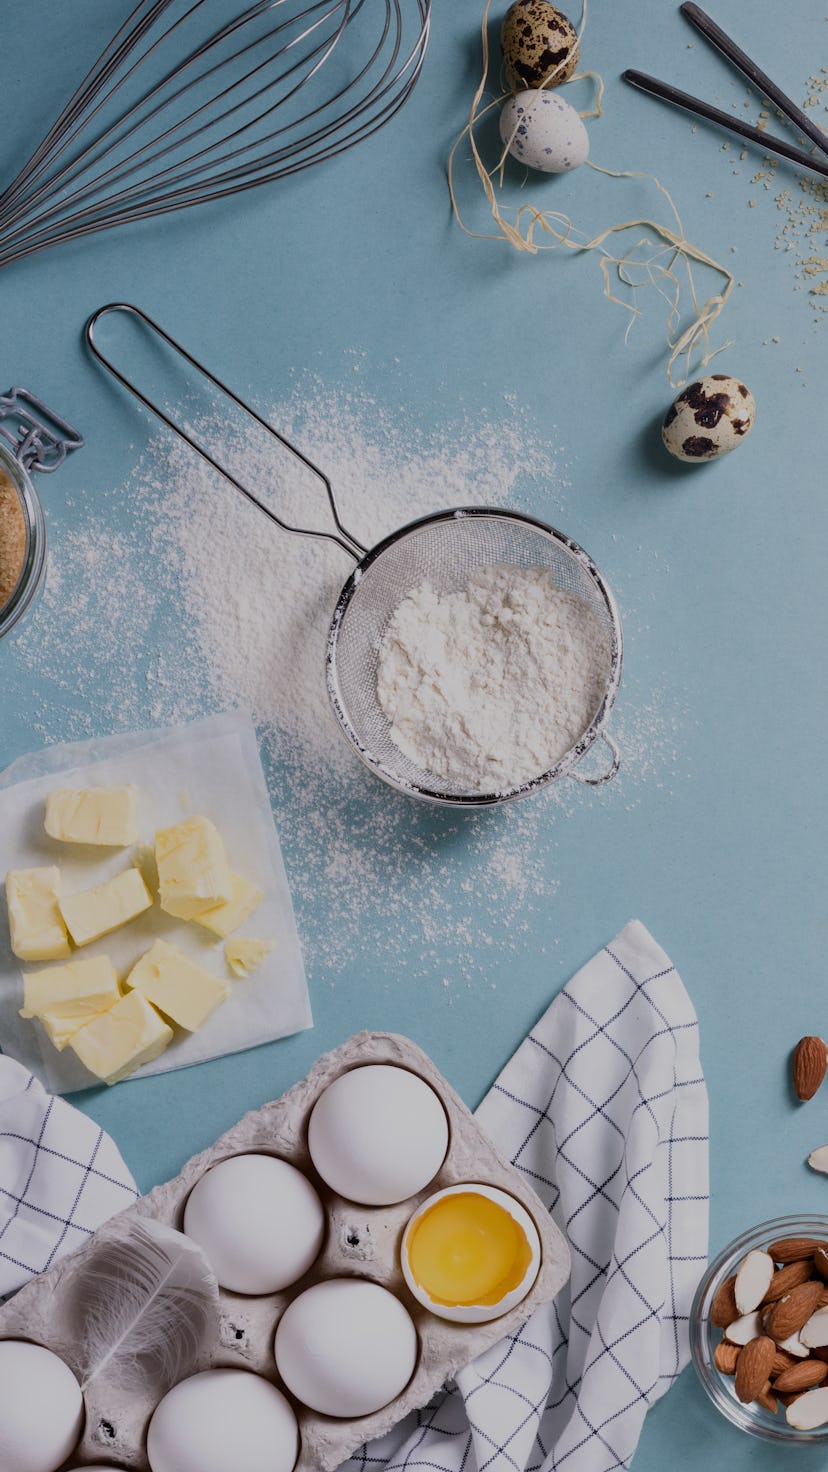 Healthy baking ingredients - flour, almond nuts, butter, eggs, biscuits over a blue table background...